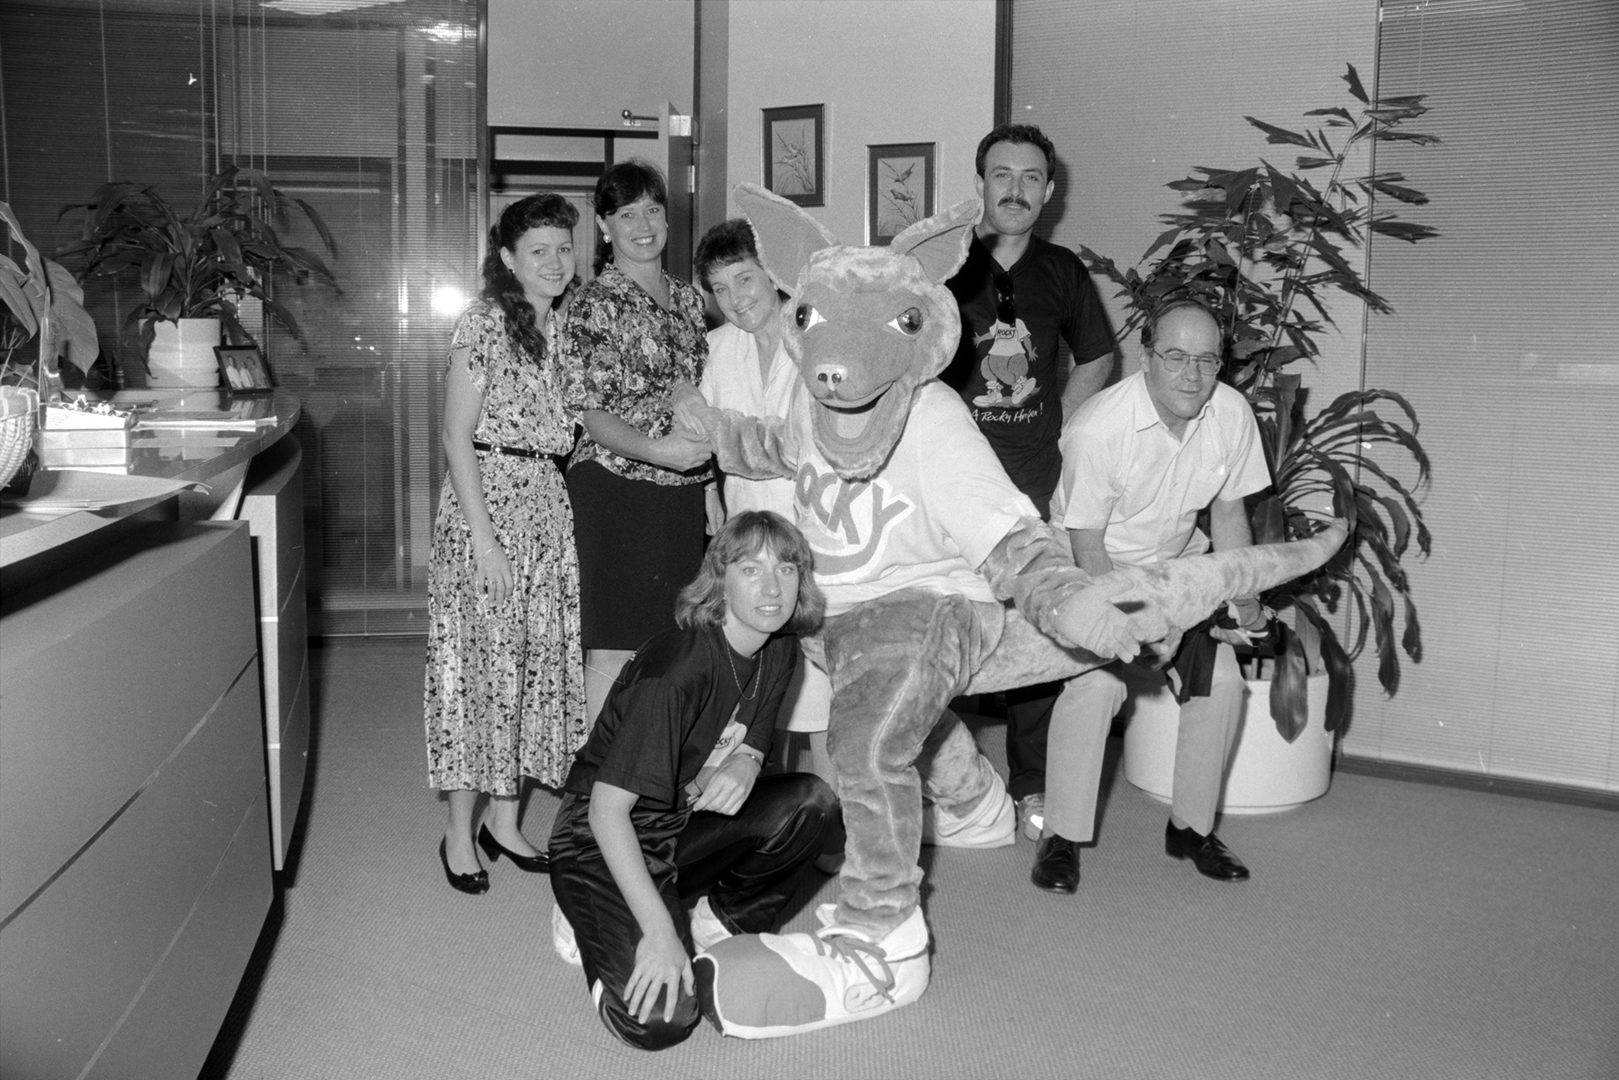 Arafura Sports Festival mascot with staff, 11 April 1991<br>Image courtesy of Library & Archives NT, Department of the Chief Minister, NTRS 3823 P1, Box 11, BW2963, Image 24a